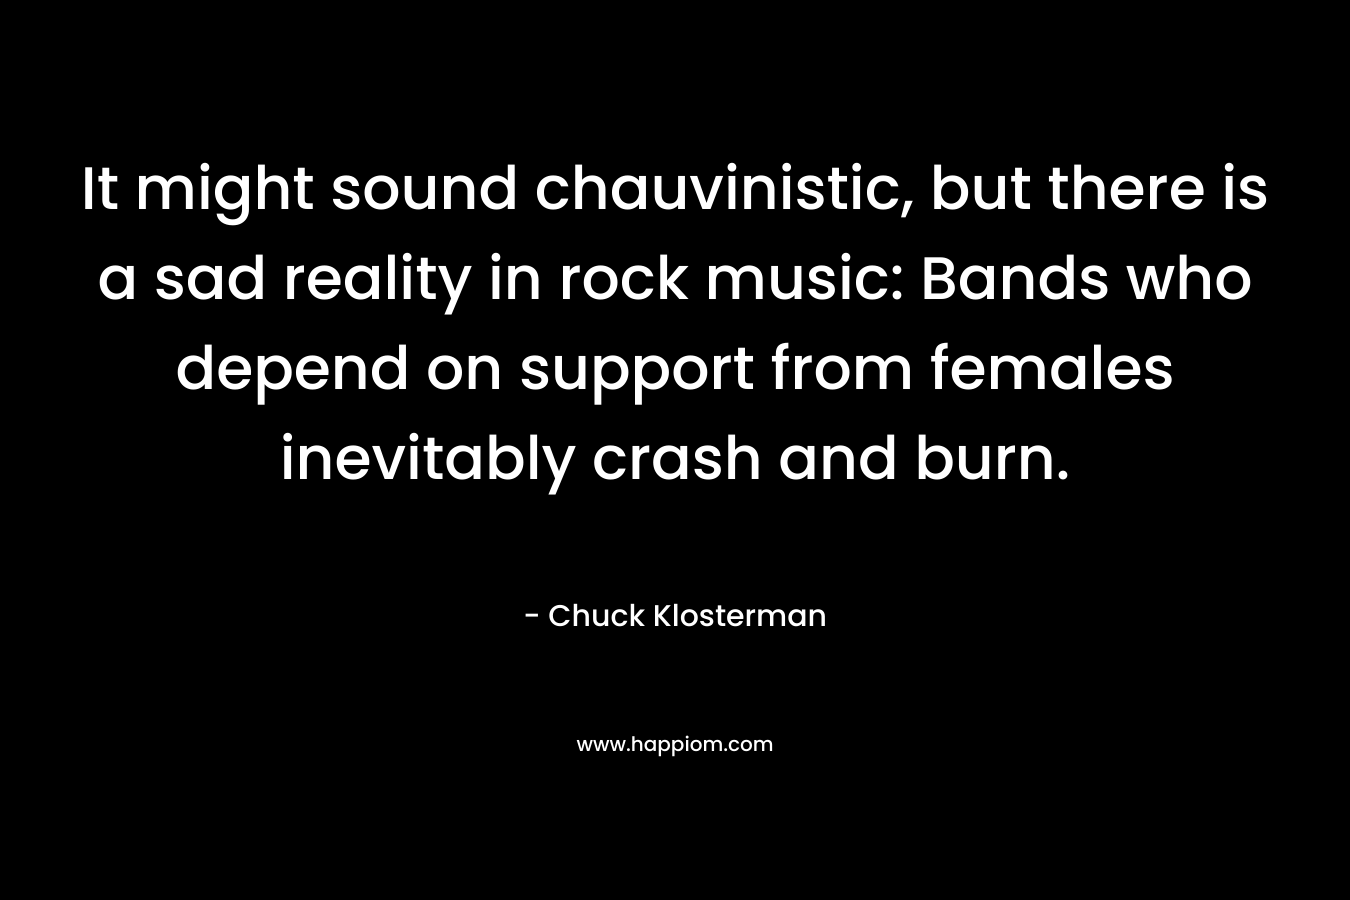 It might sound chauvinistic, but there is a sad reality in rock music: Bands who depend on support from females inevitably crash and burn. – Chuck Klosterman